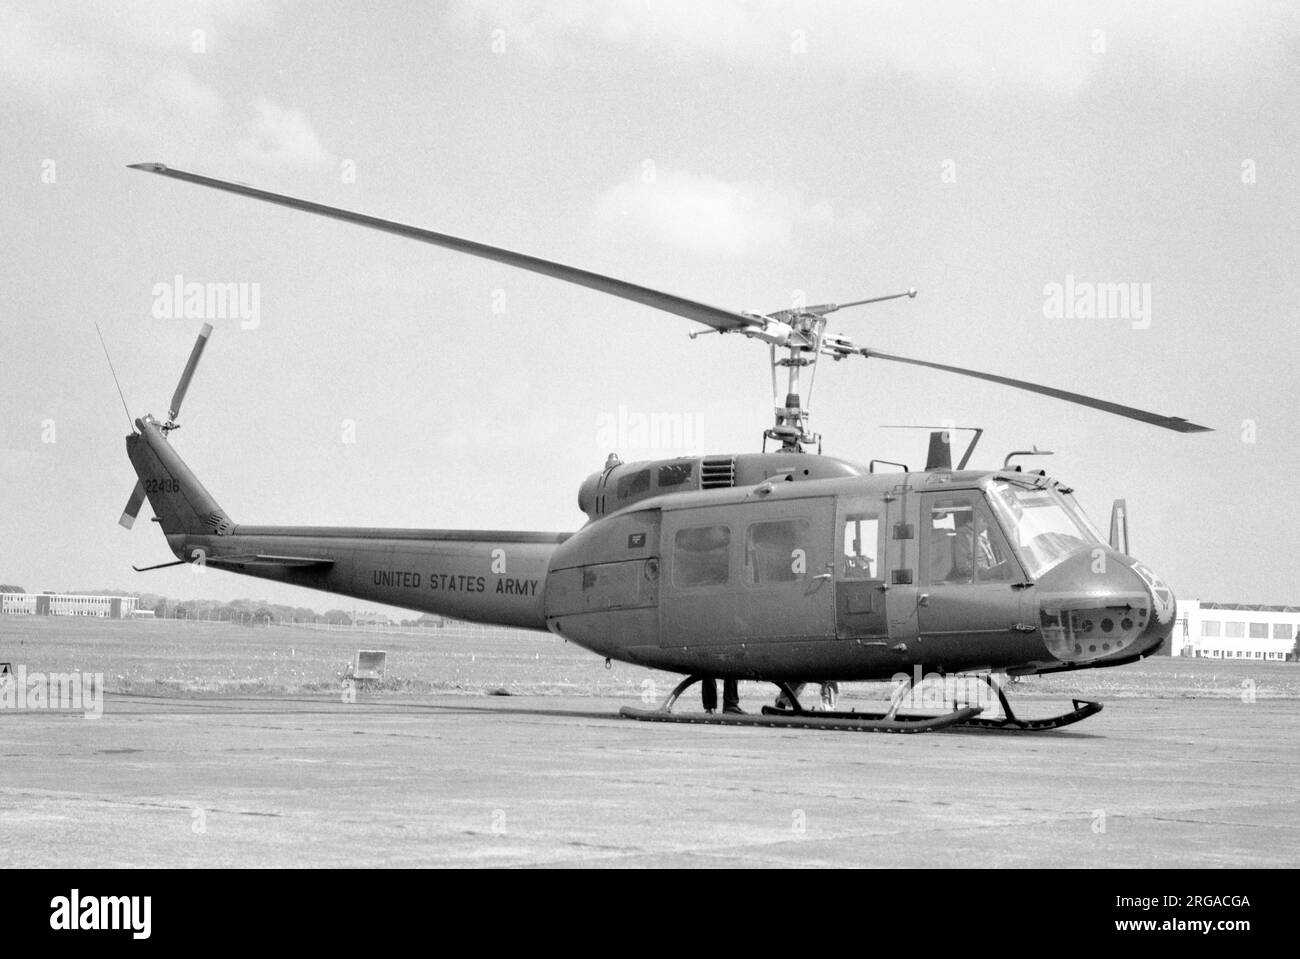 United States Army - Bell UH-1H-BF Iroquois 74-22436 (msn 13760), at RAF Turnhouse / Edinburgh Airport on 14 July 1980. (Noted during March 2003 in storage at the AMCOM/Dynacorp facility at Temple/Draughton-Miller RAP, TX.) Stock Photo